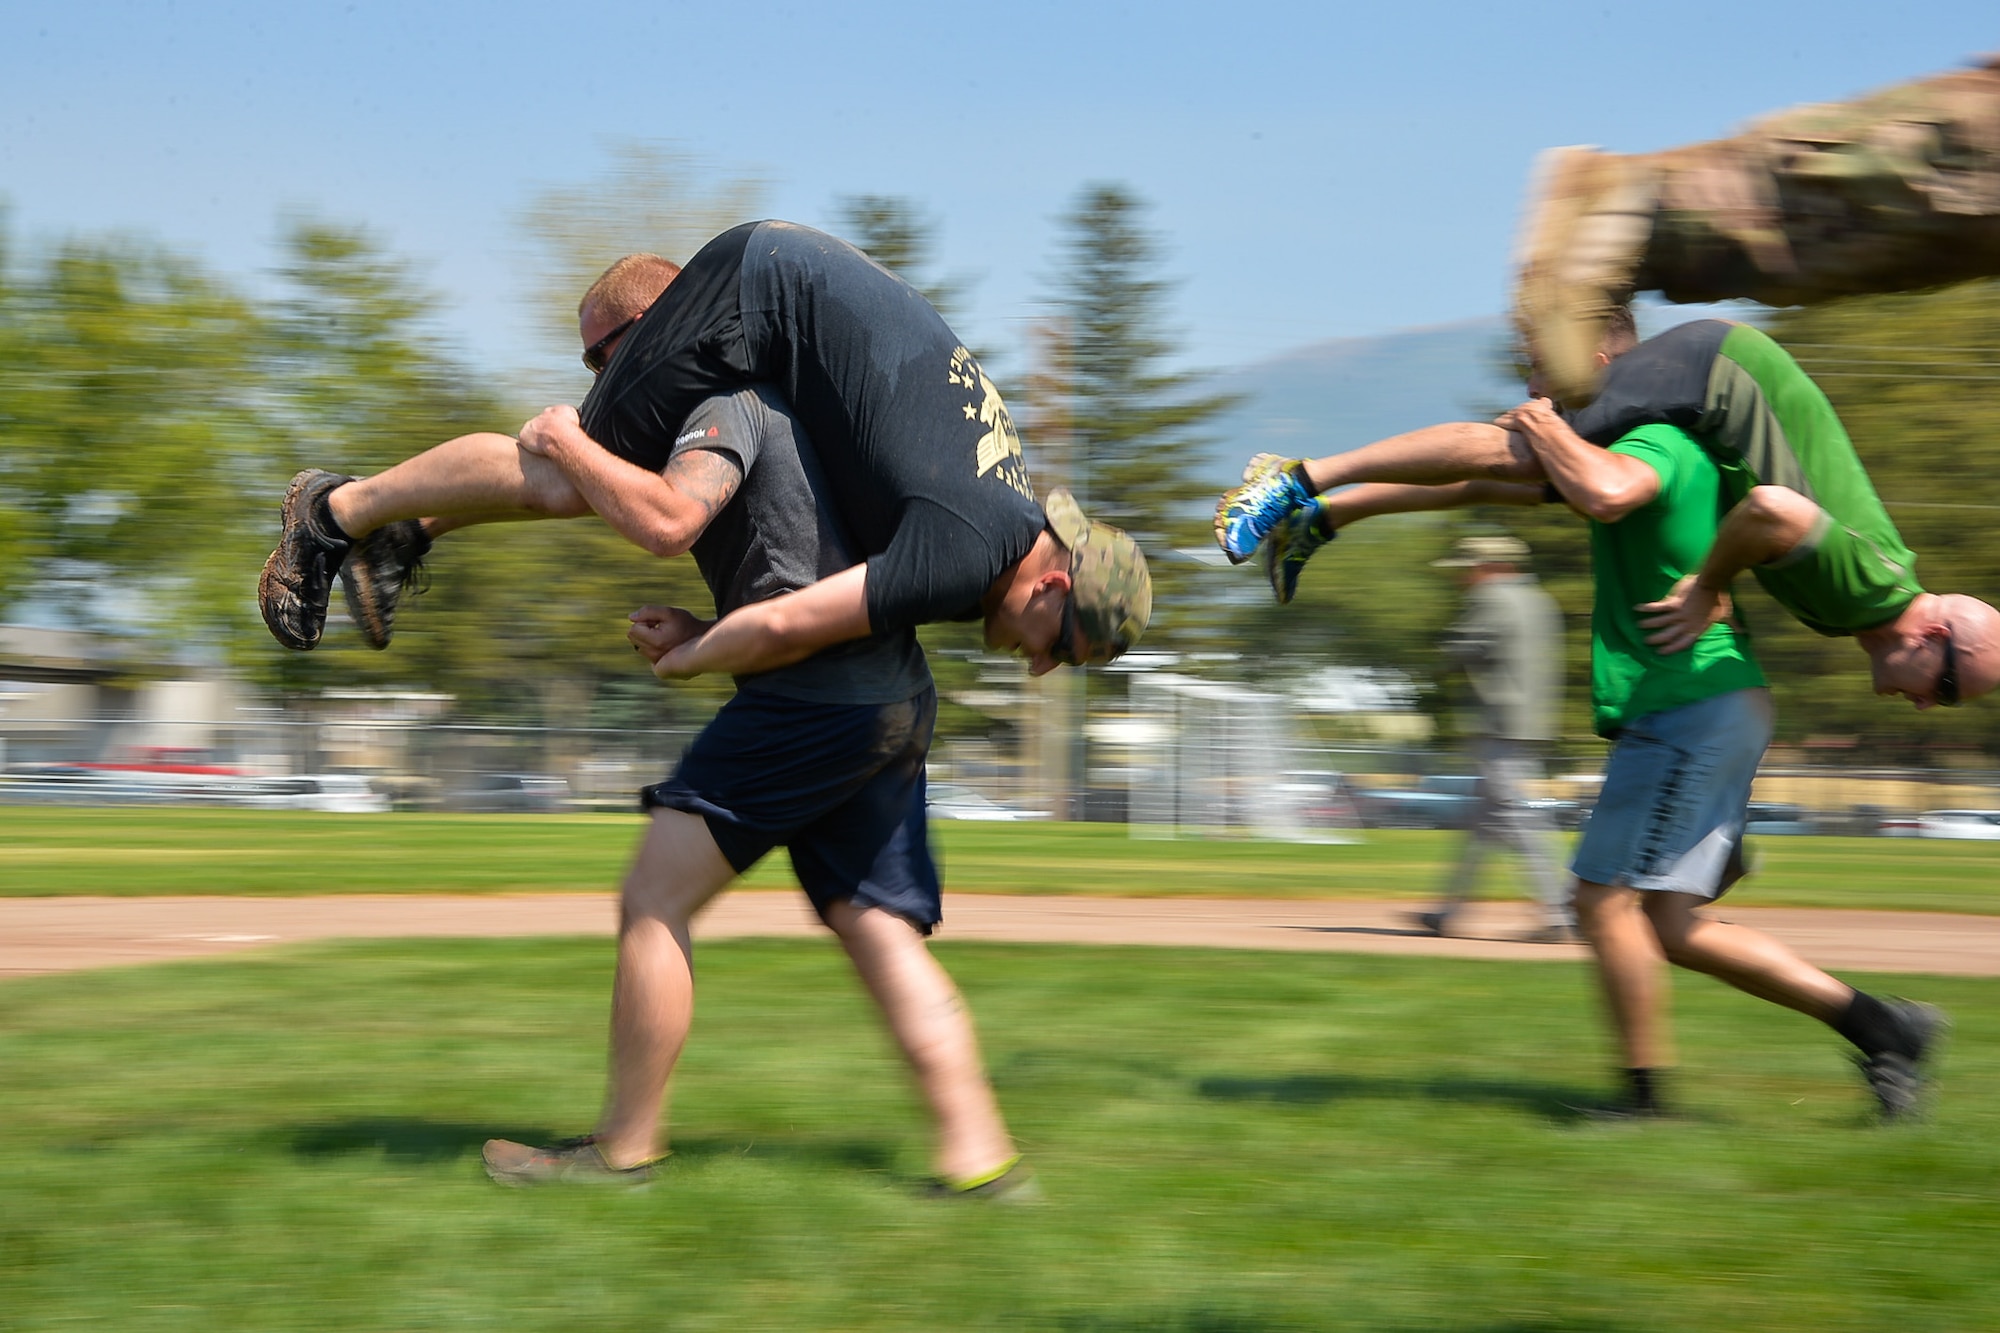 GoRuck participants transport simulated casualties during a team cohesion challenge at Hill Air Force Base, Utah, Aug. 19, 2016.  (U.S. Air Force photo by R. Nial Bradshaw)